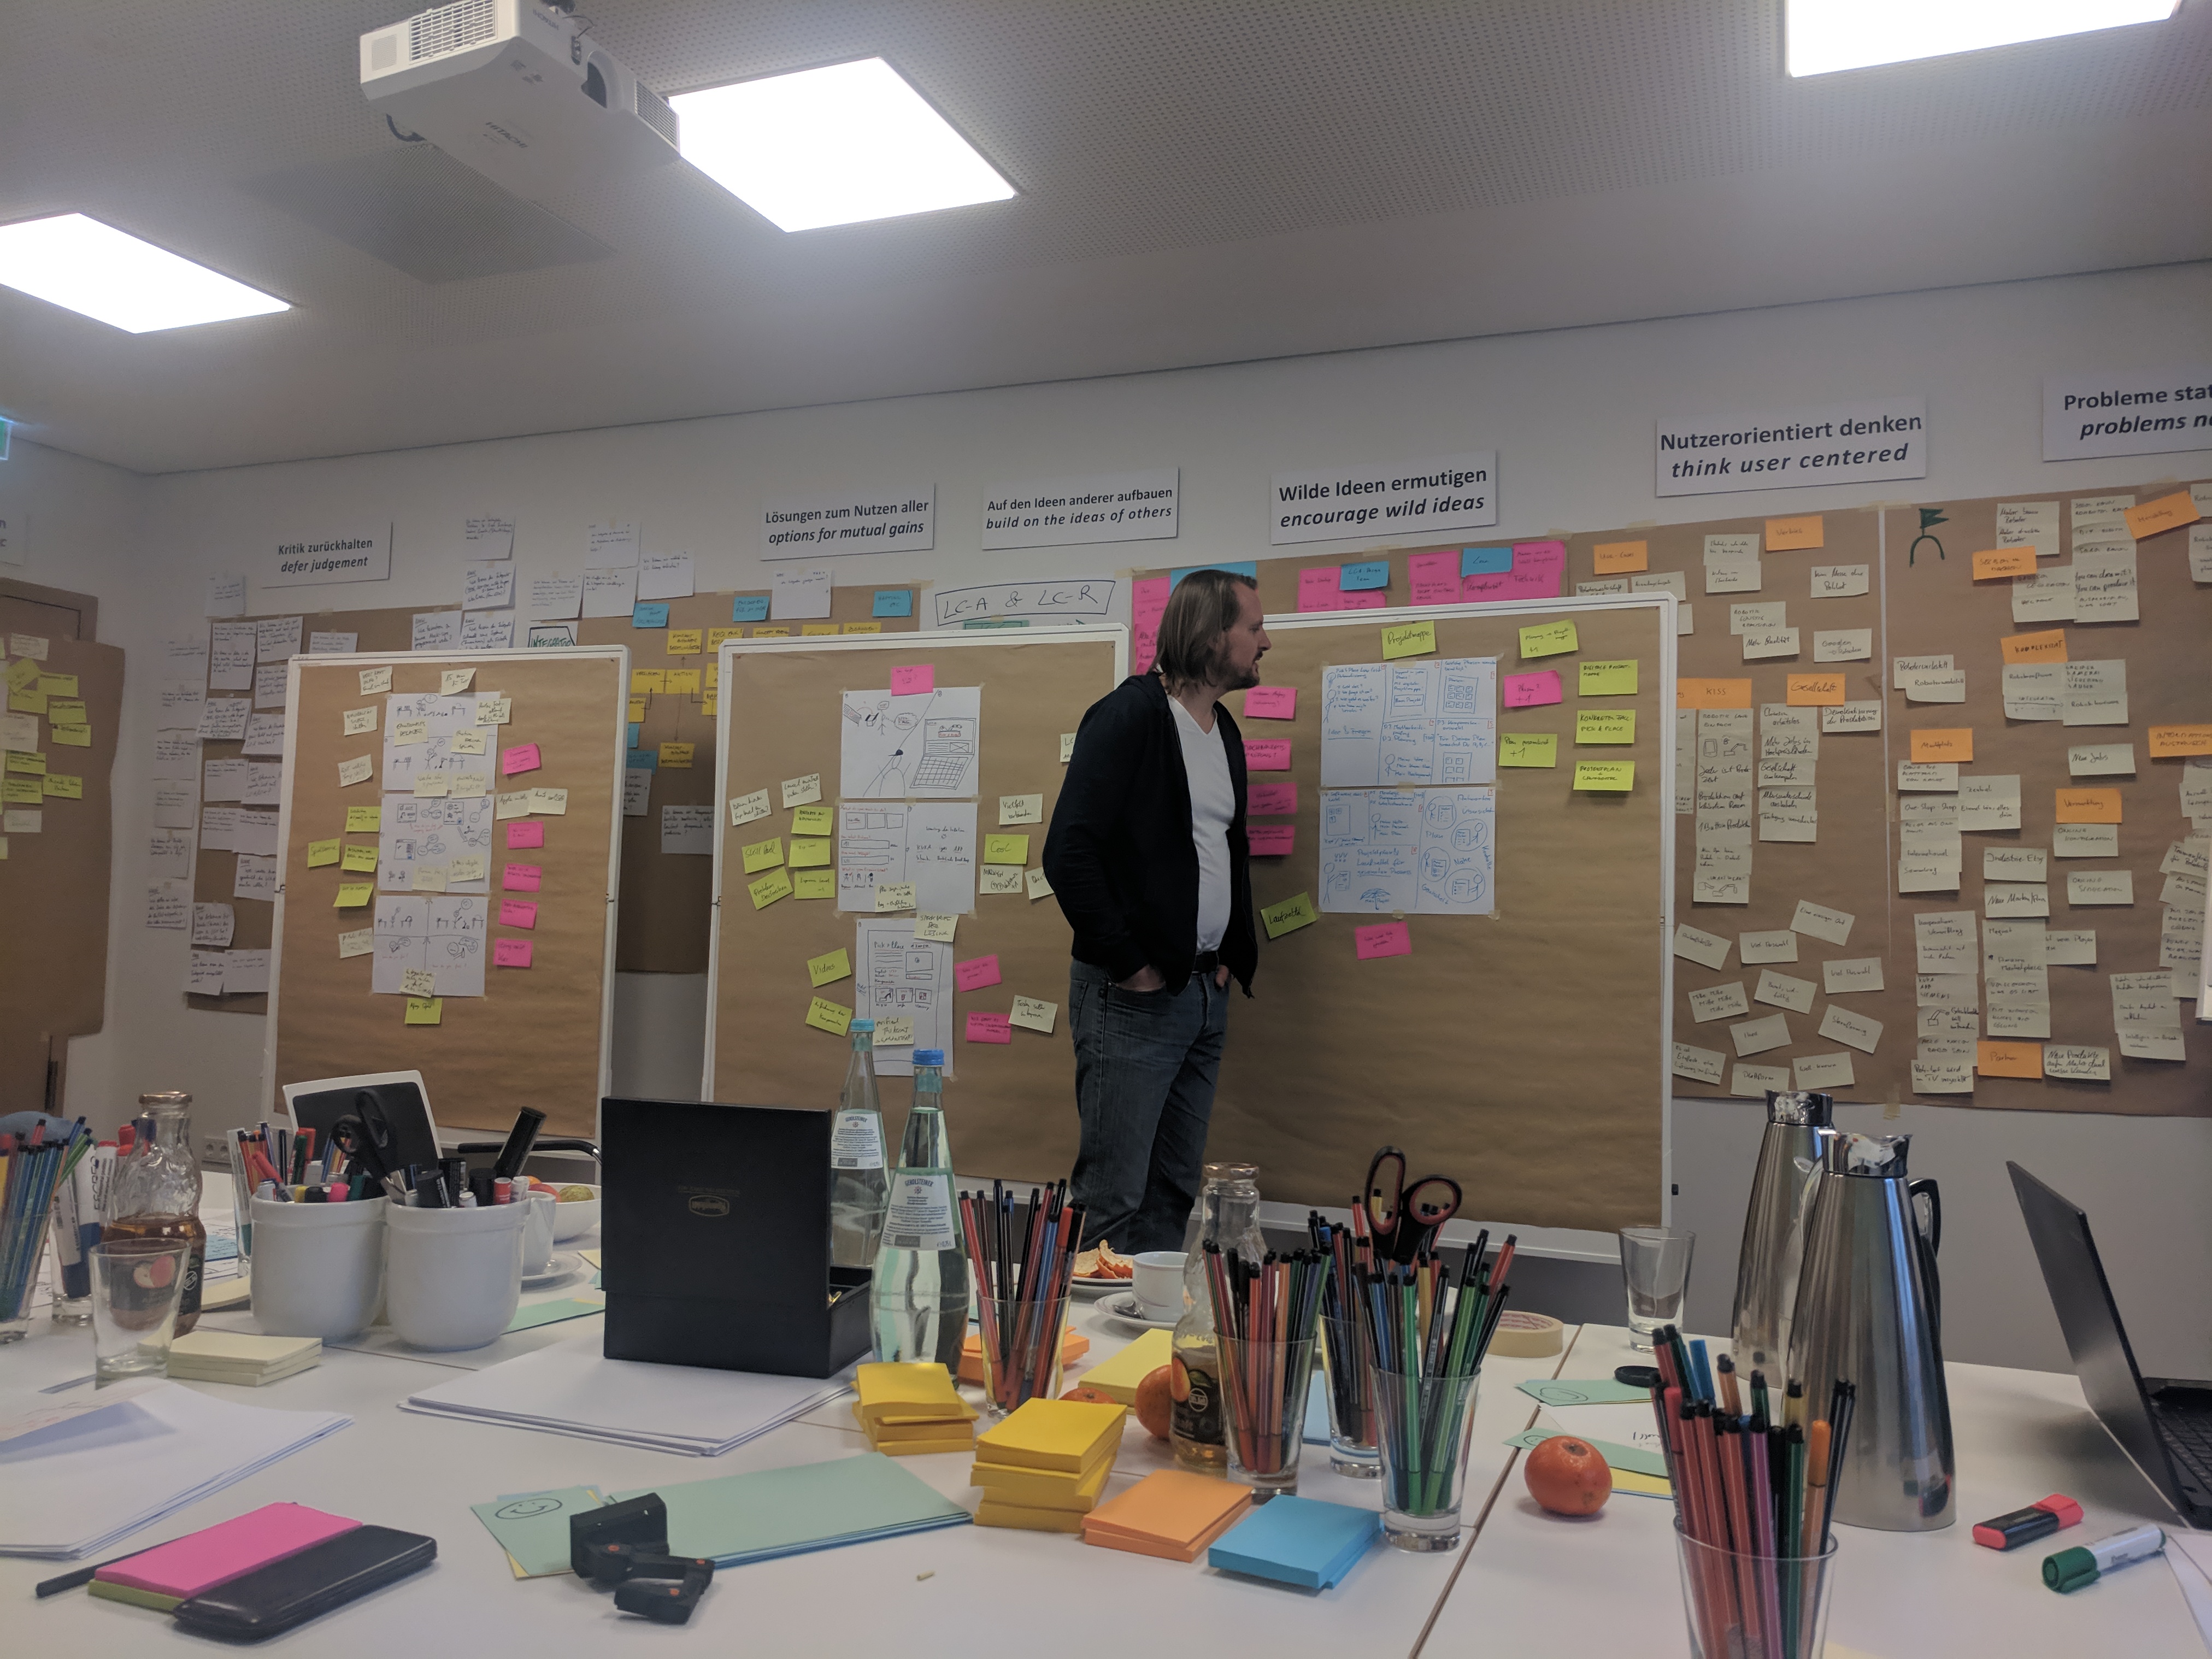 A picture taken during a design sprint, showing whiteboards